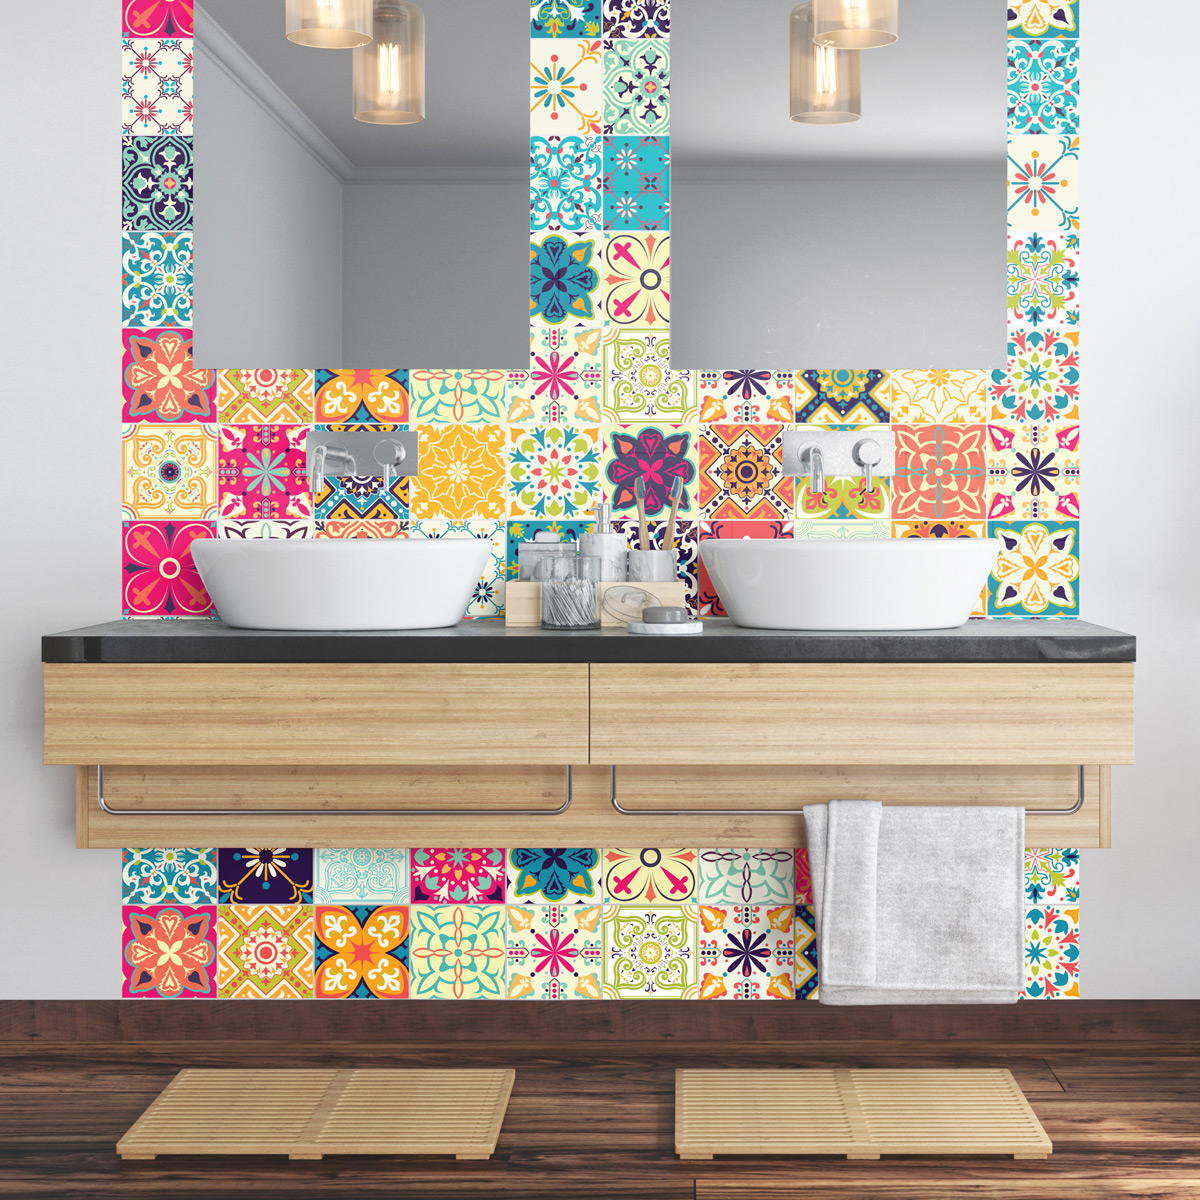 60 wall decal cement tiles azulejos agueda